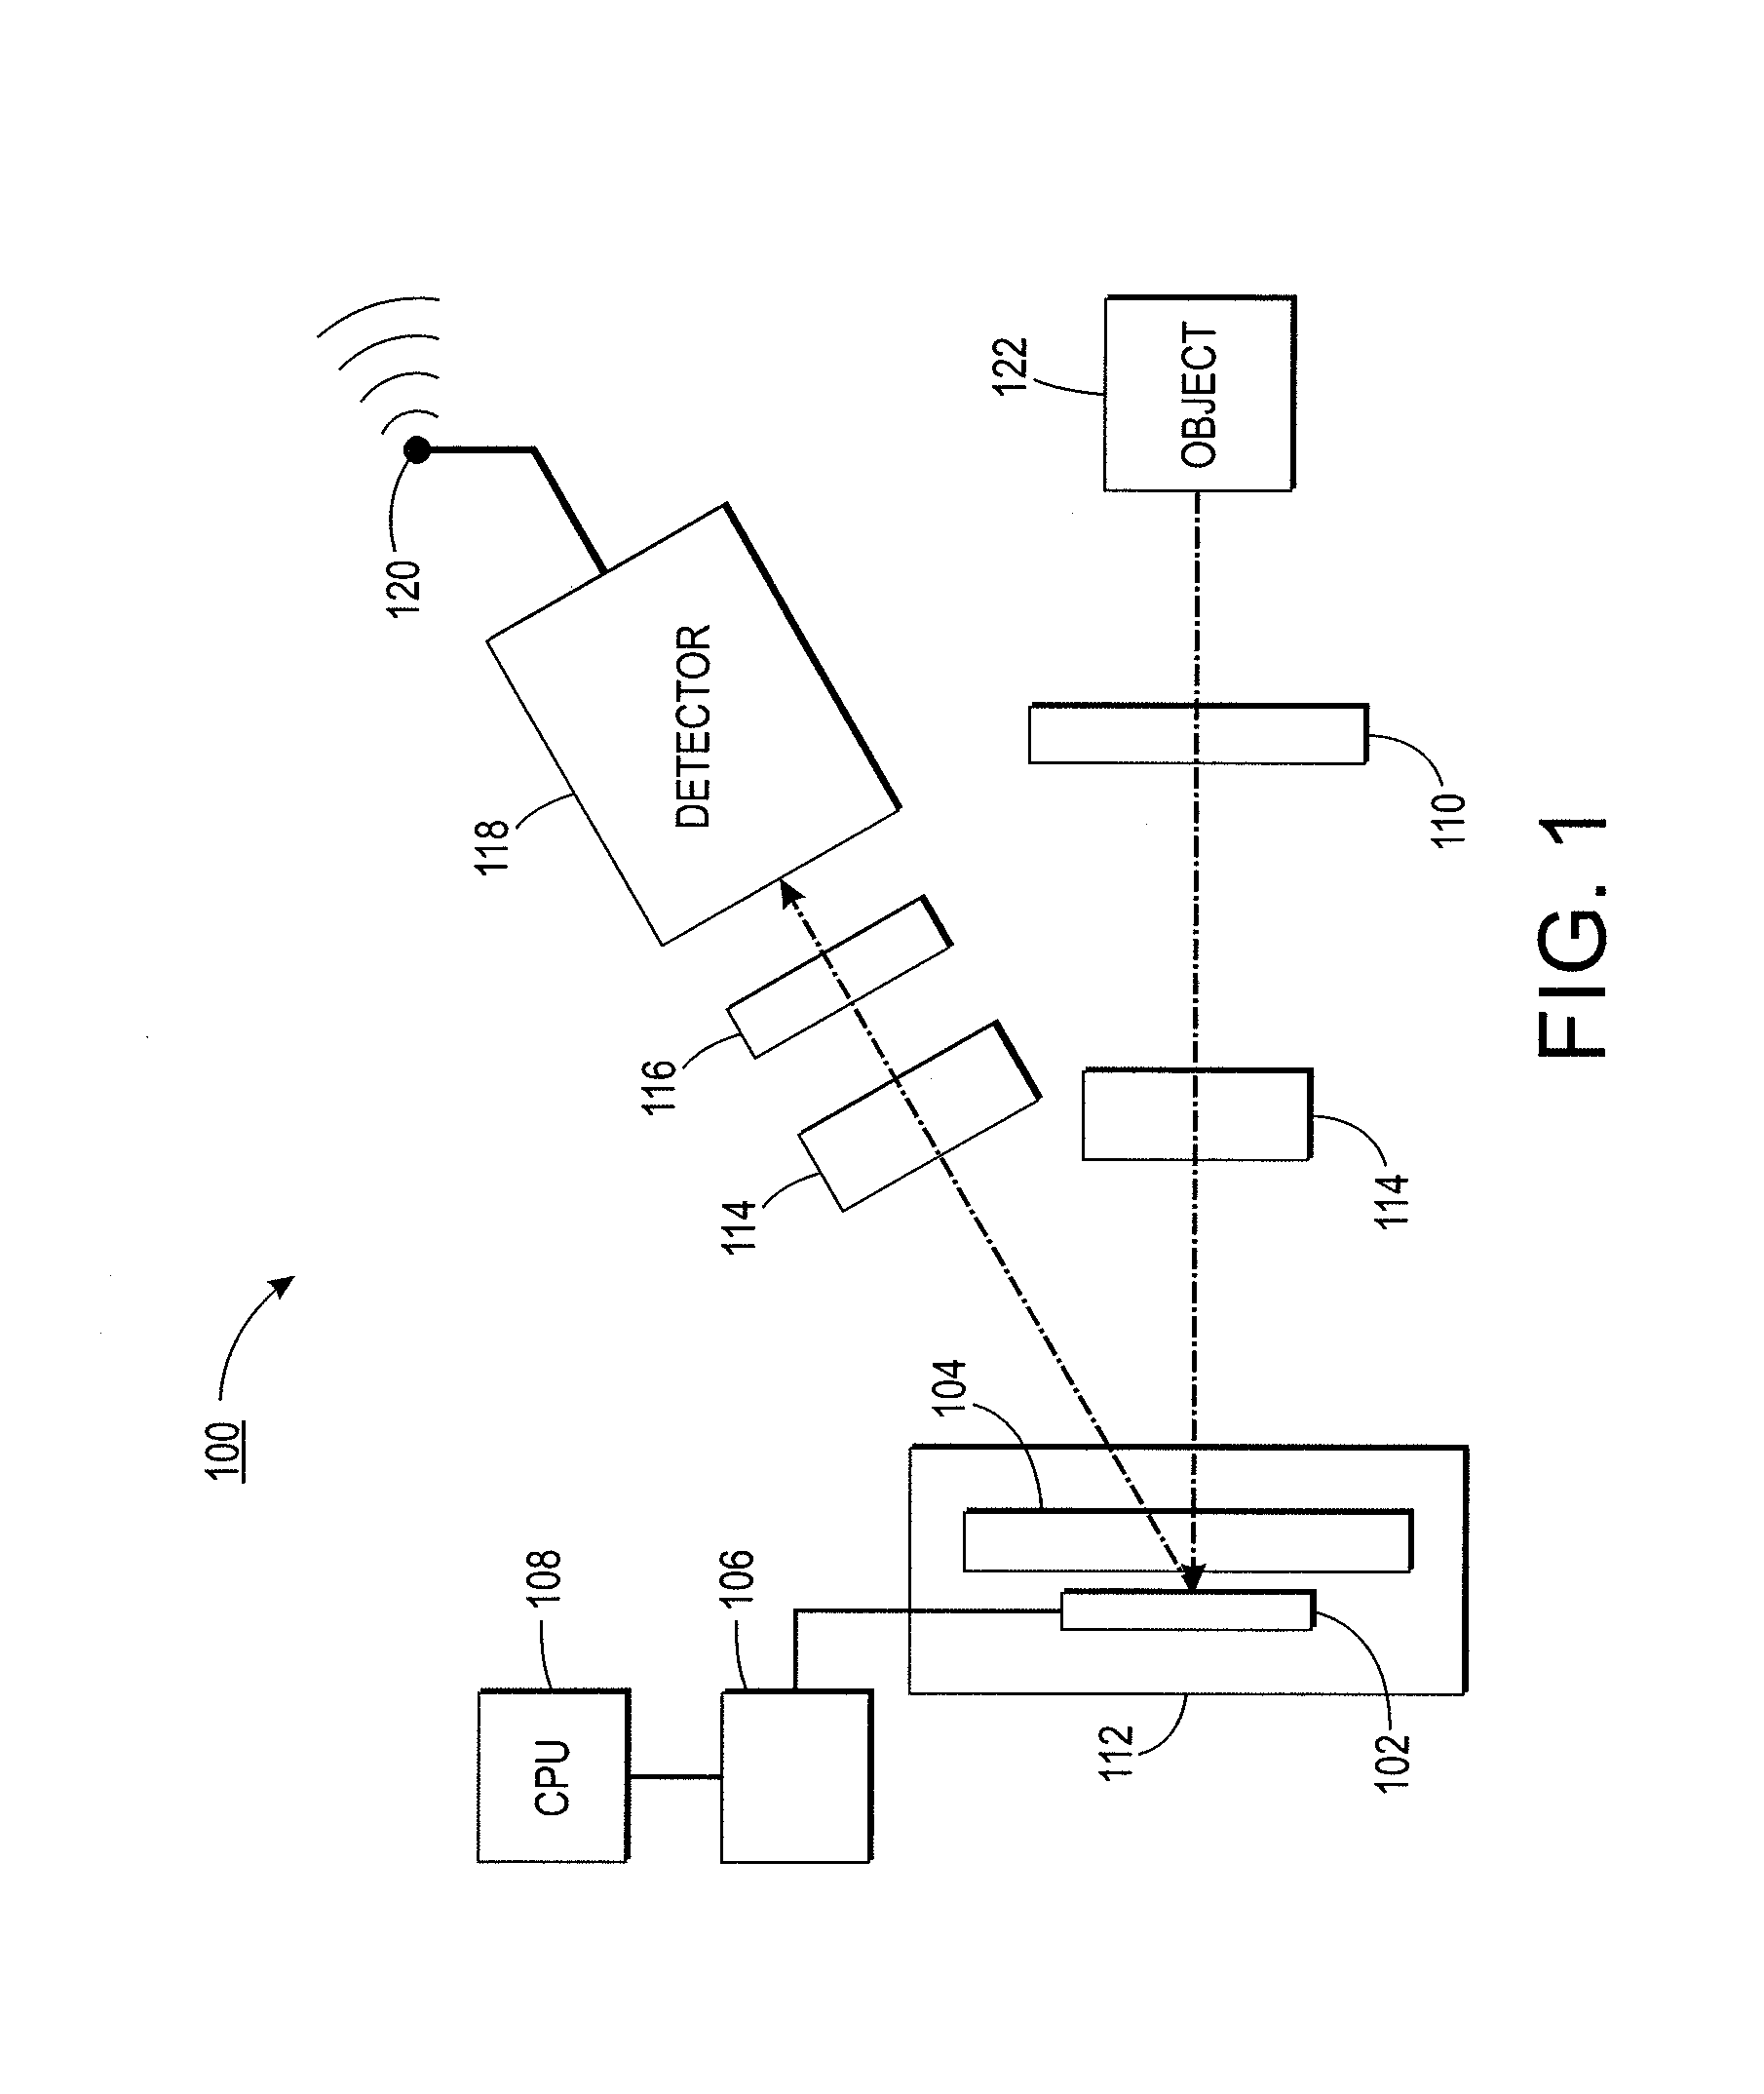 Method and apparatus for compressive imaging of a scene using a single pixel camera